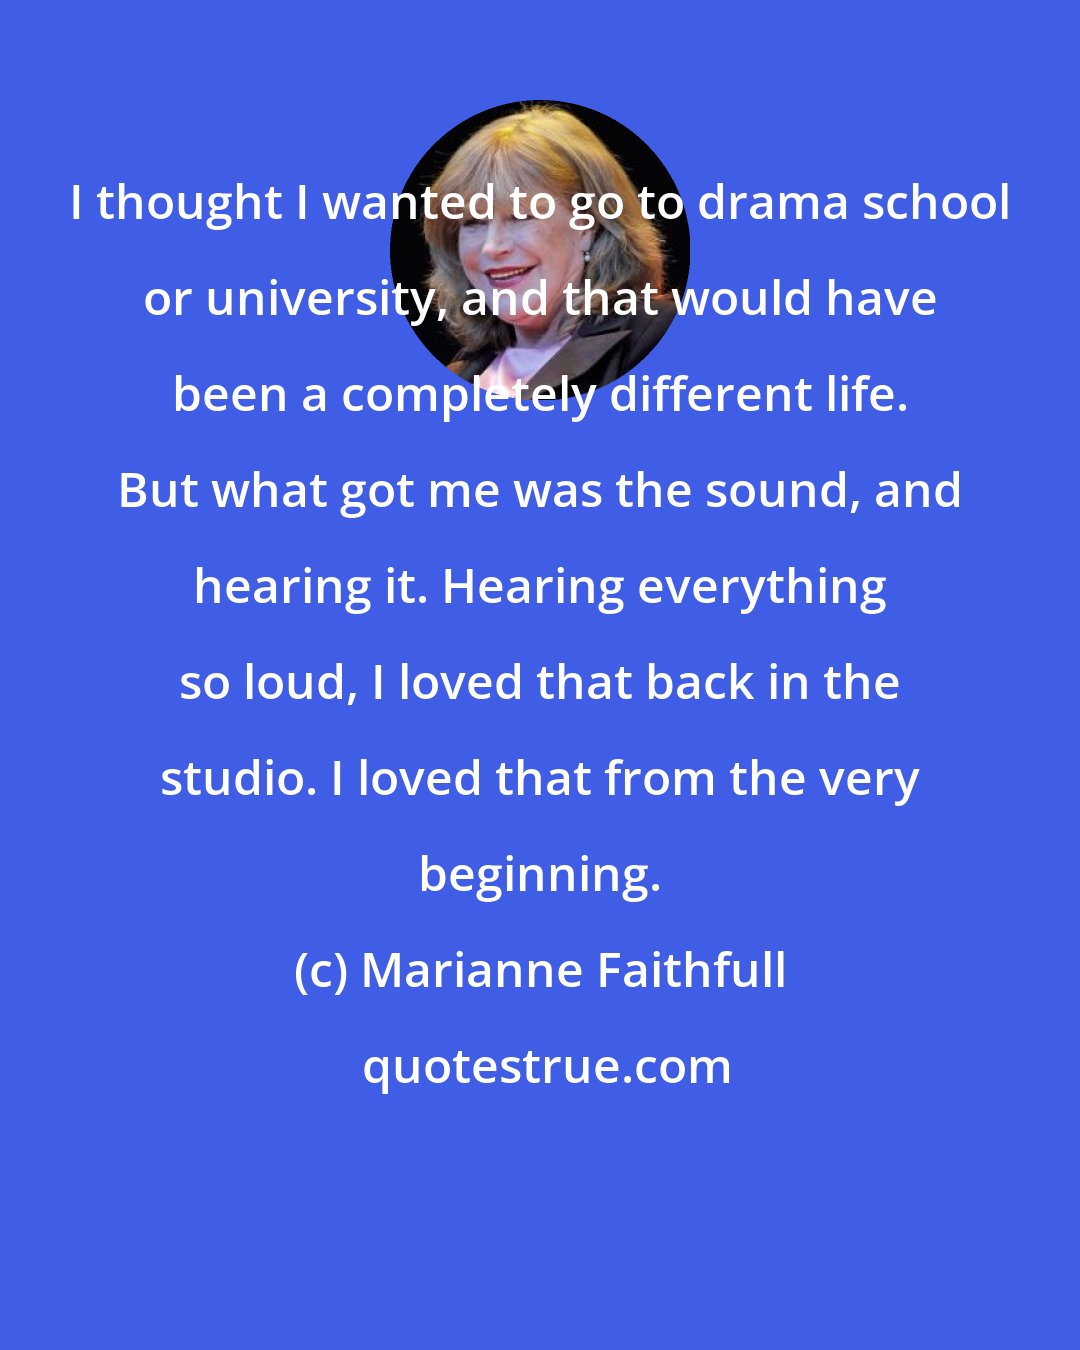 Marianne Faithfull: I thought I wanted to go to drama school or university, and that would have been a completely different life. But what got me was the sound, and hearing it. Hearing everything so loud, I loved that back in the studio. I loved that from the very beginning.